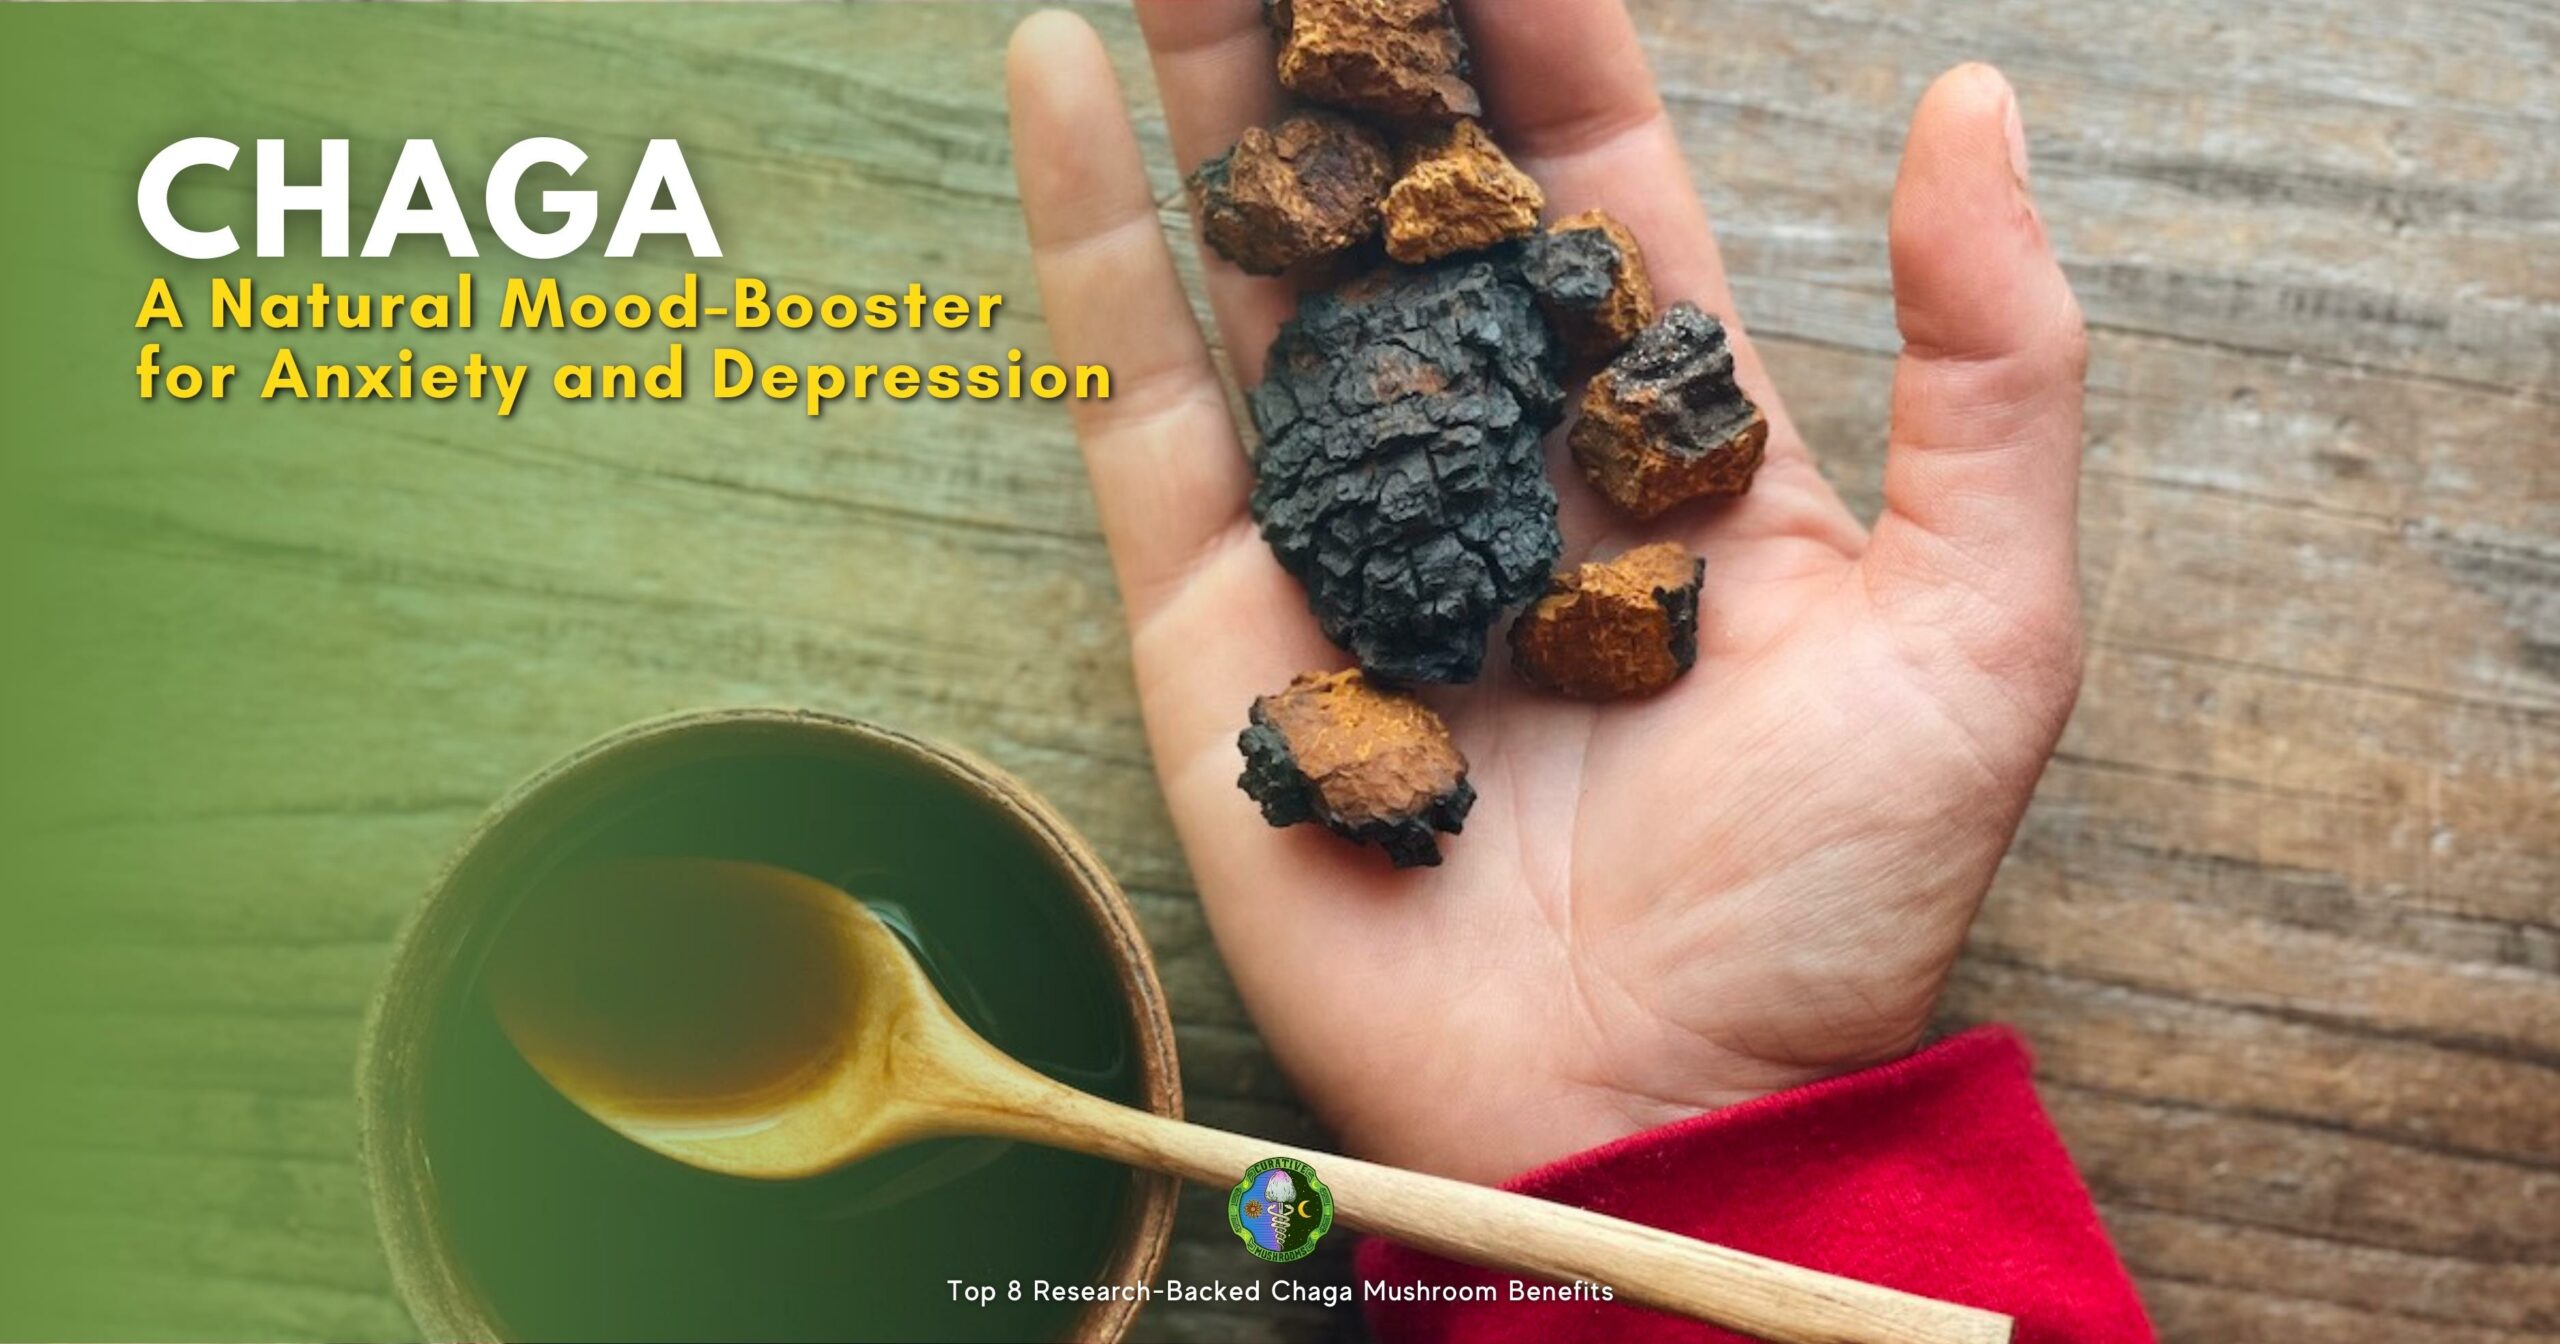 Top 8 Research-Backed Chaga Mushroom Benefits - Manage anxiety and depression - ergothioneine - reduce symptoms of anxiety and depression-like behavior